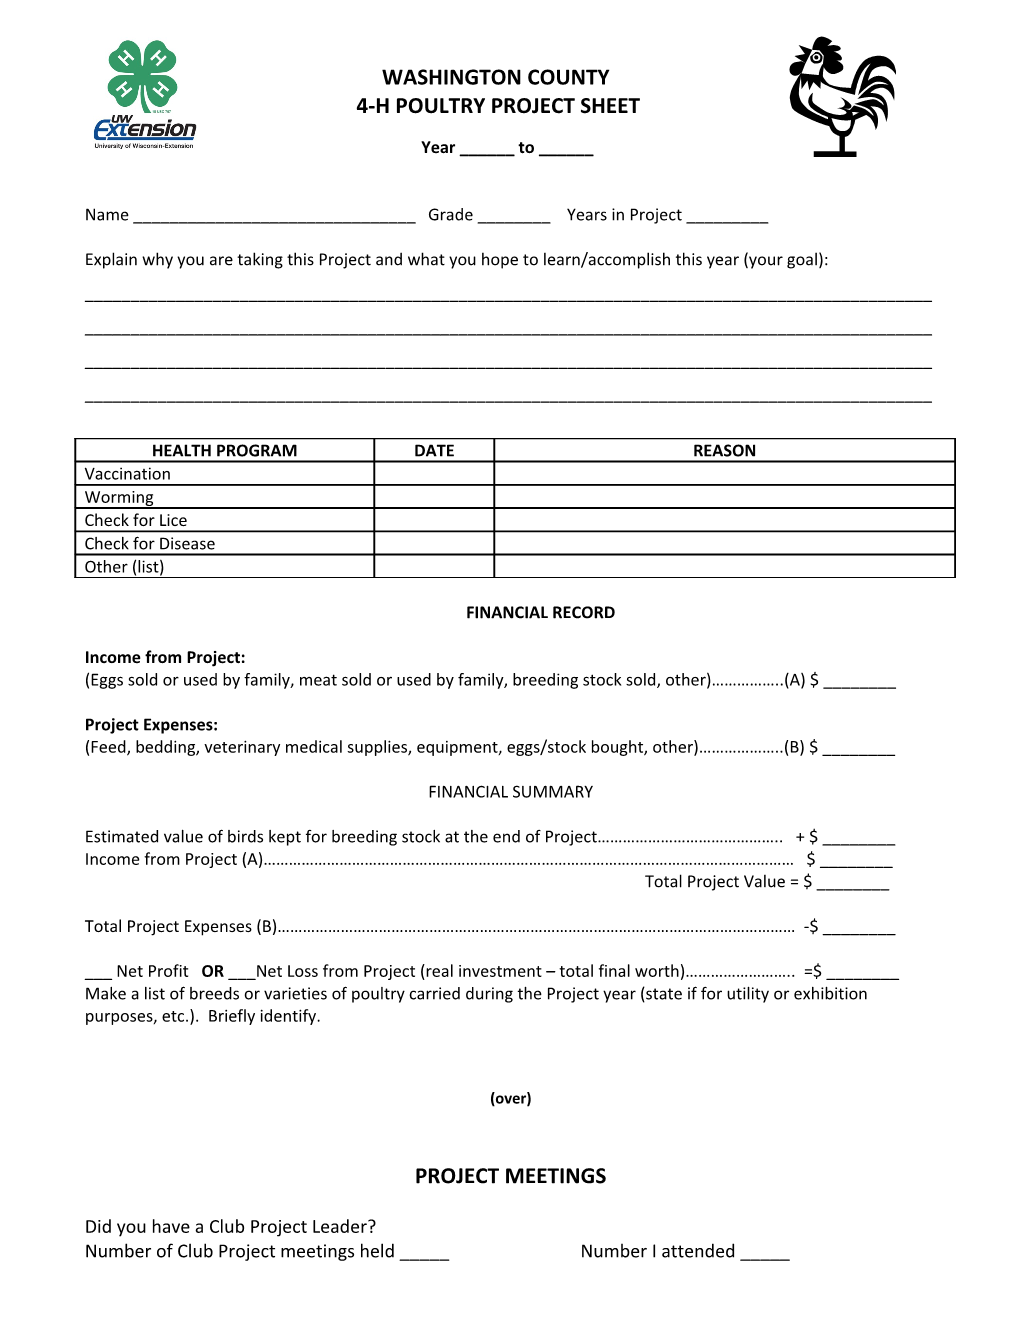 4-H Poultry Project Sheet